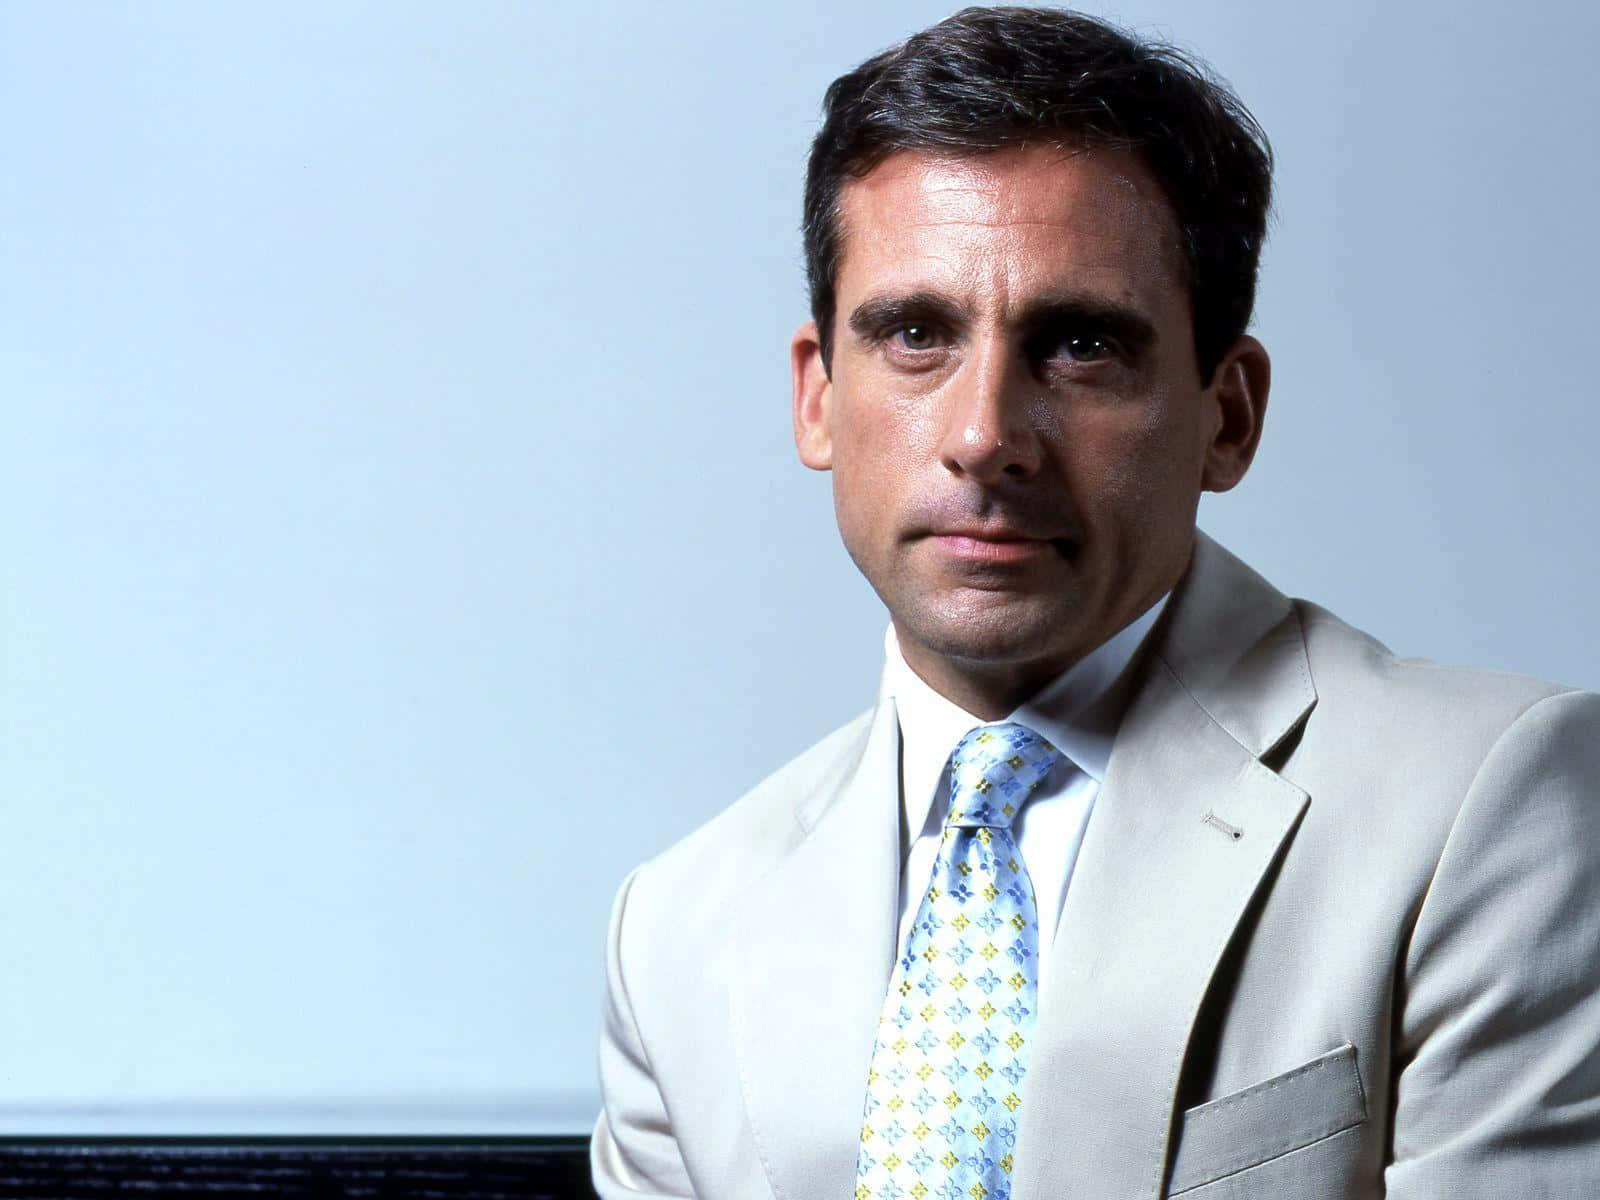 Steve Carell - An American Actor and Comedian Wallpaper